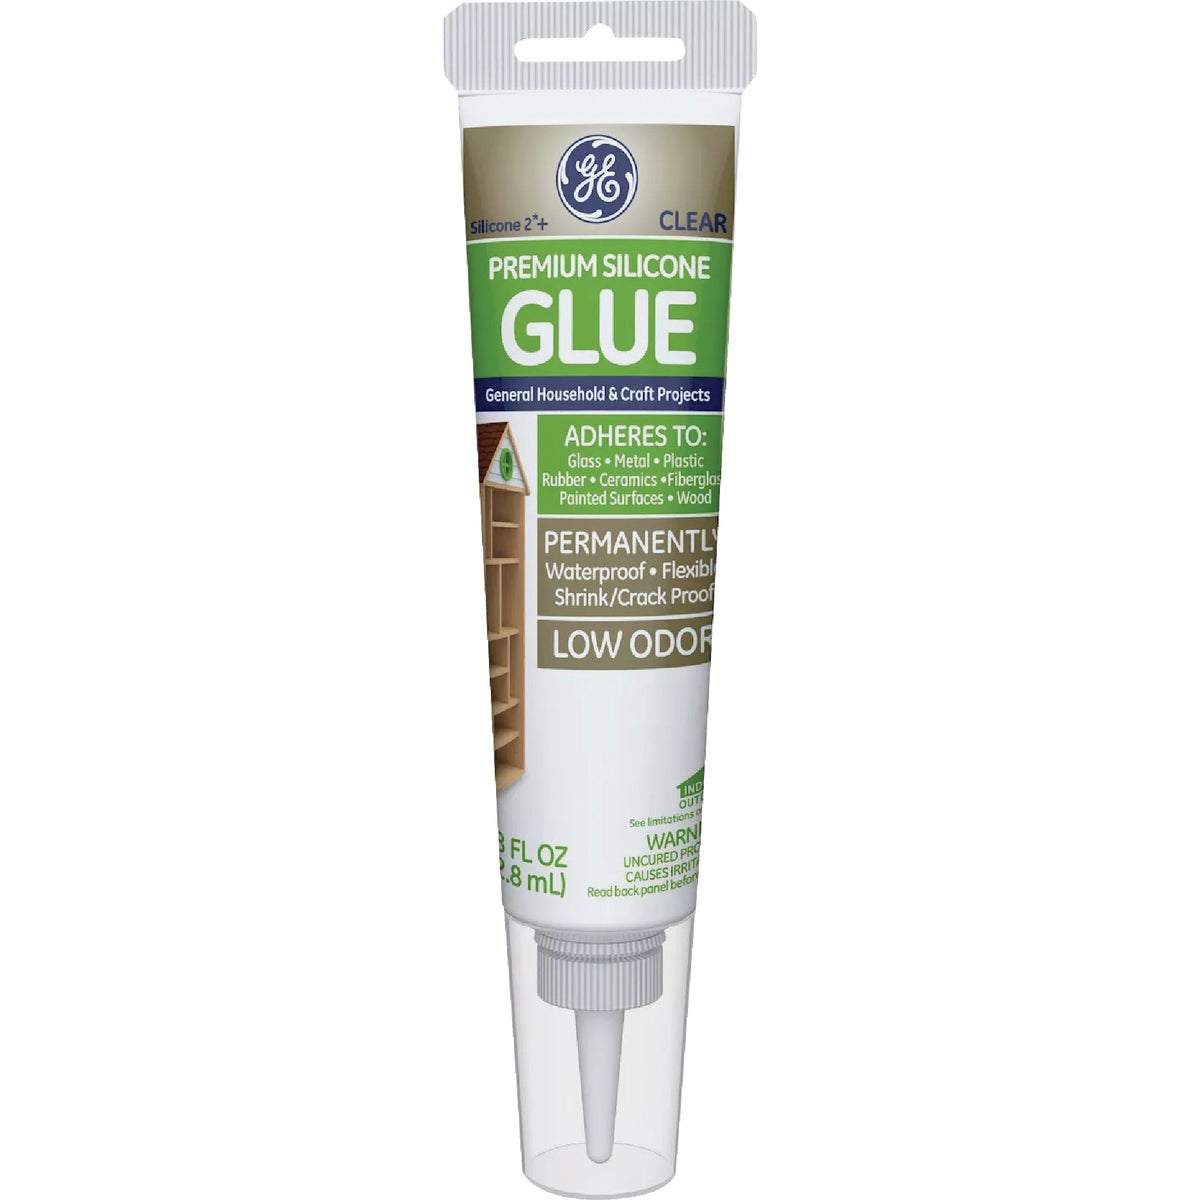 Item 351372, GE Glue is a premium 100% Silicone adhesive from Americas #1 Silicone Brand